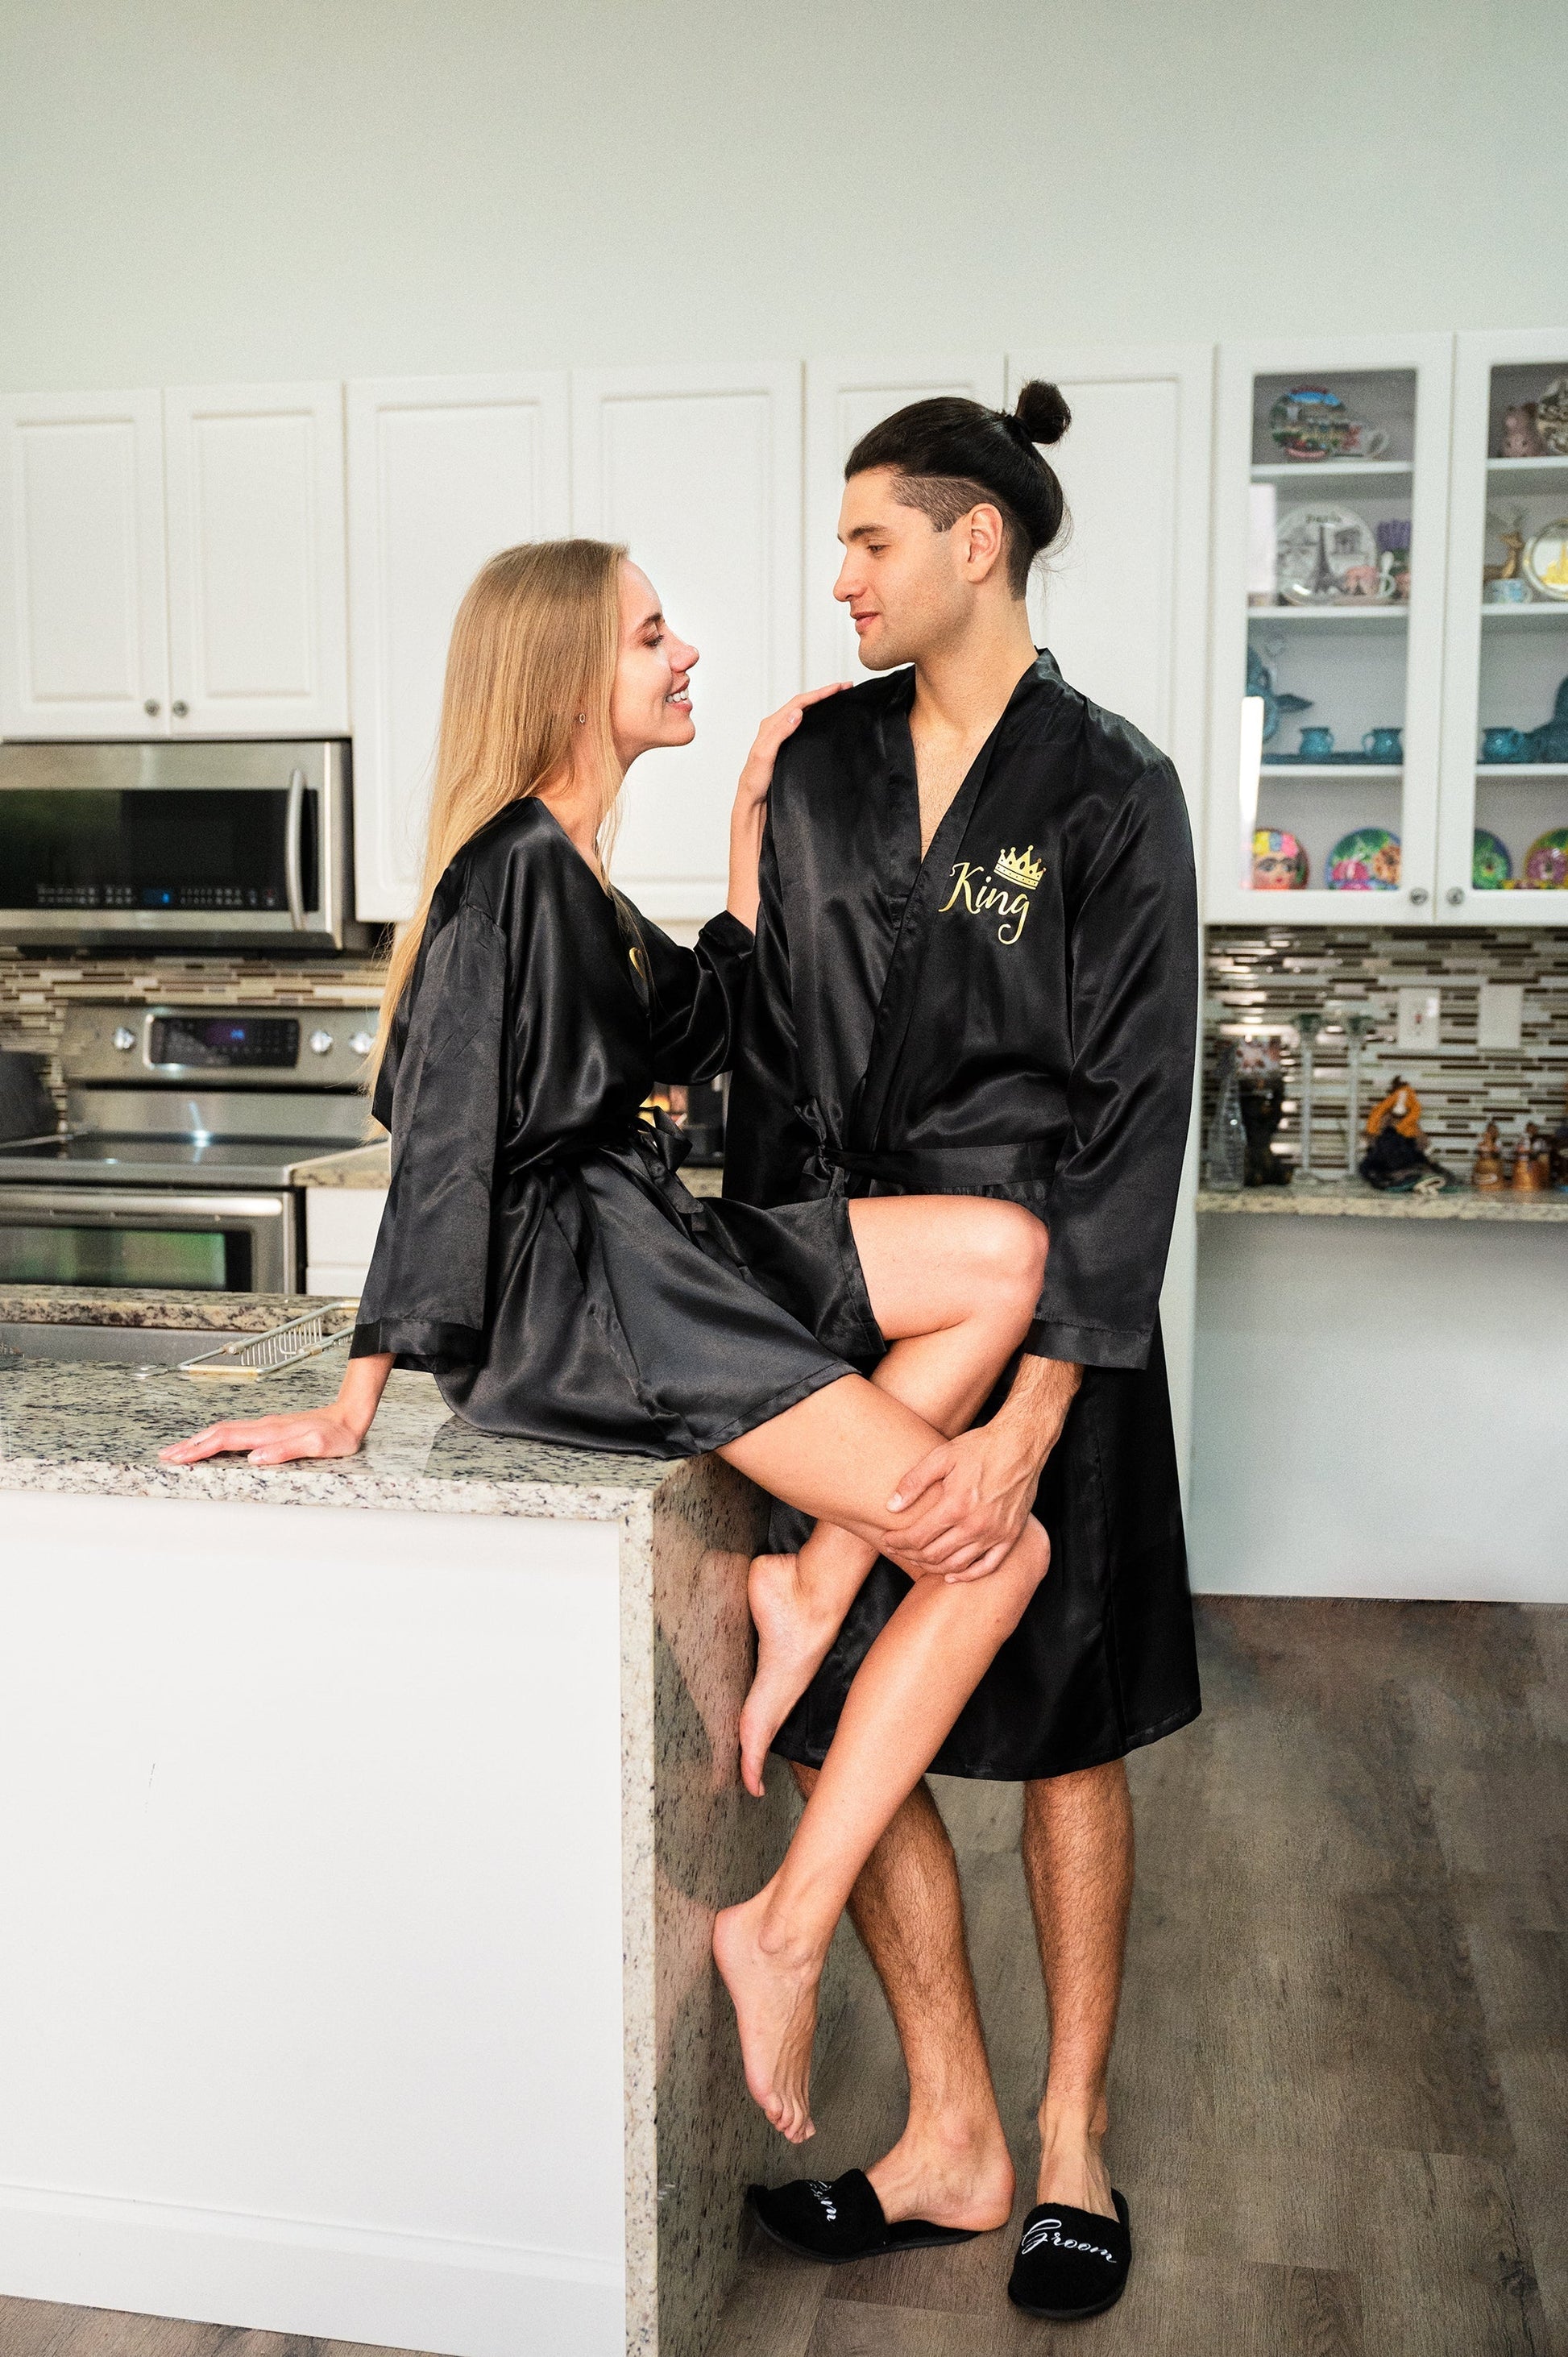 Matching Satin Robes Groom and Bride - women’s robes